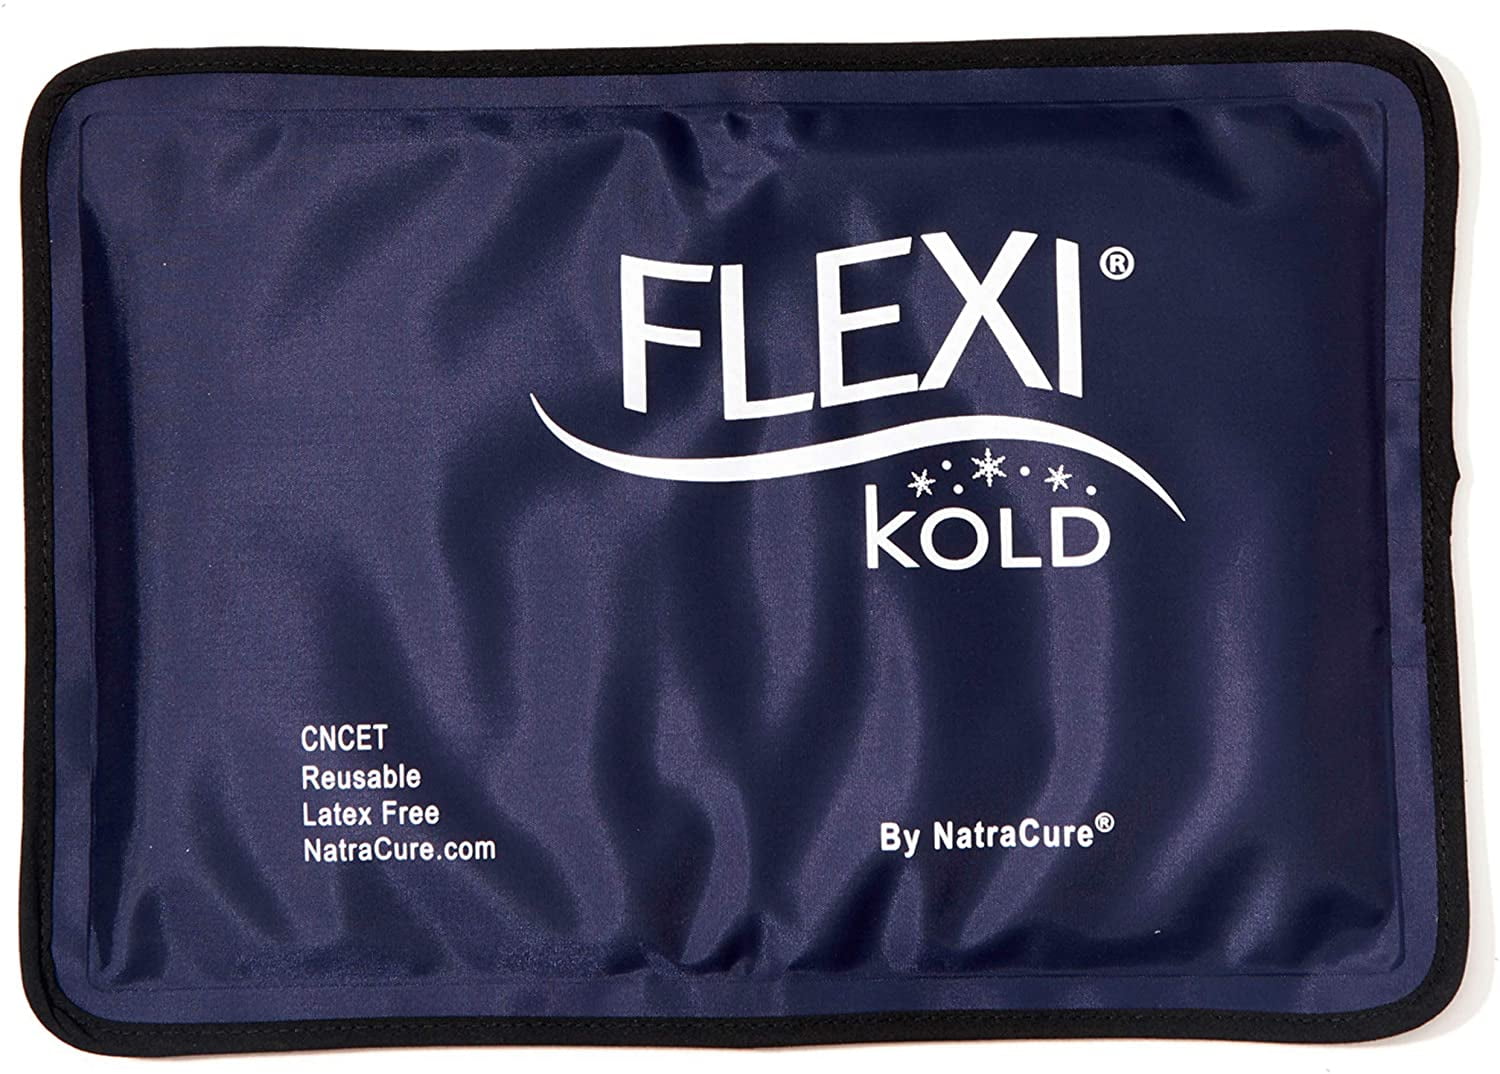 Reusable Ice Pack for Injuries, 11 x 14.5 - 2 Pack XL Flexible